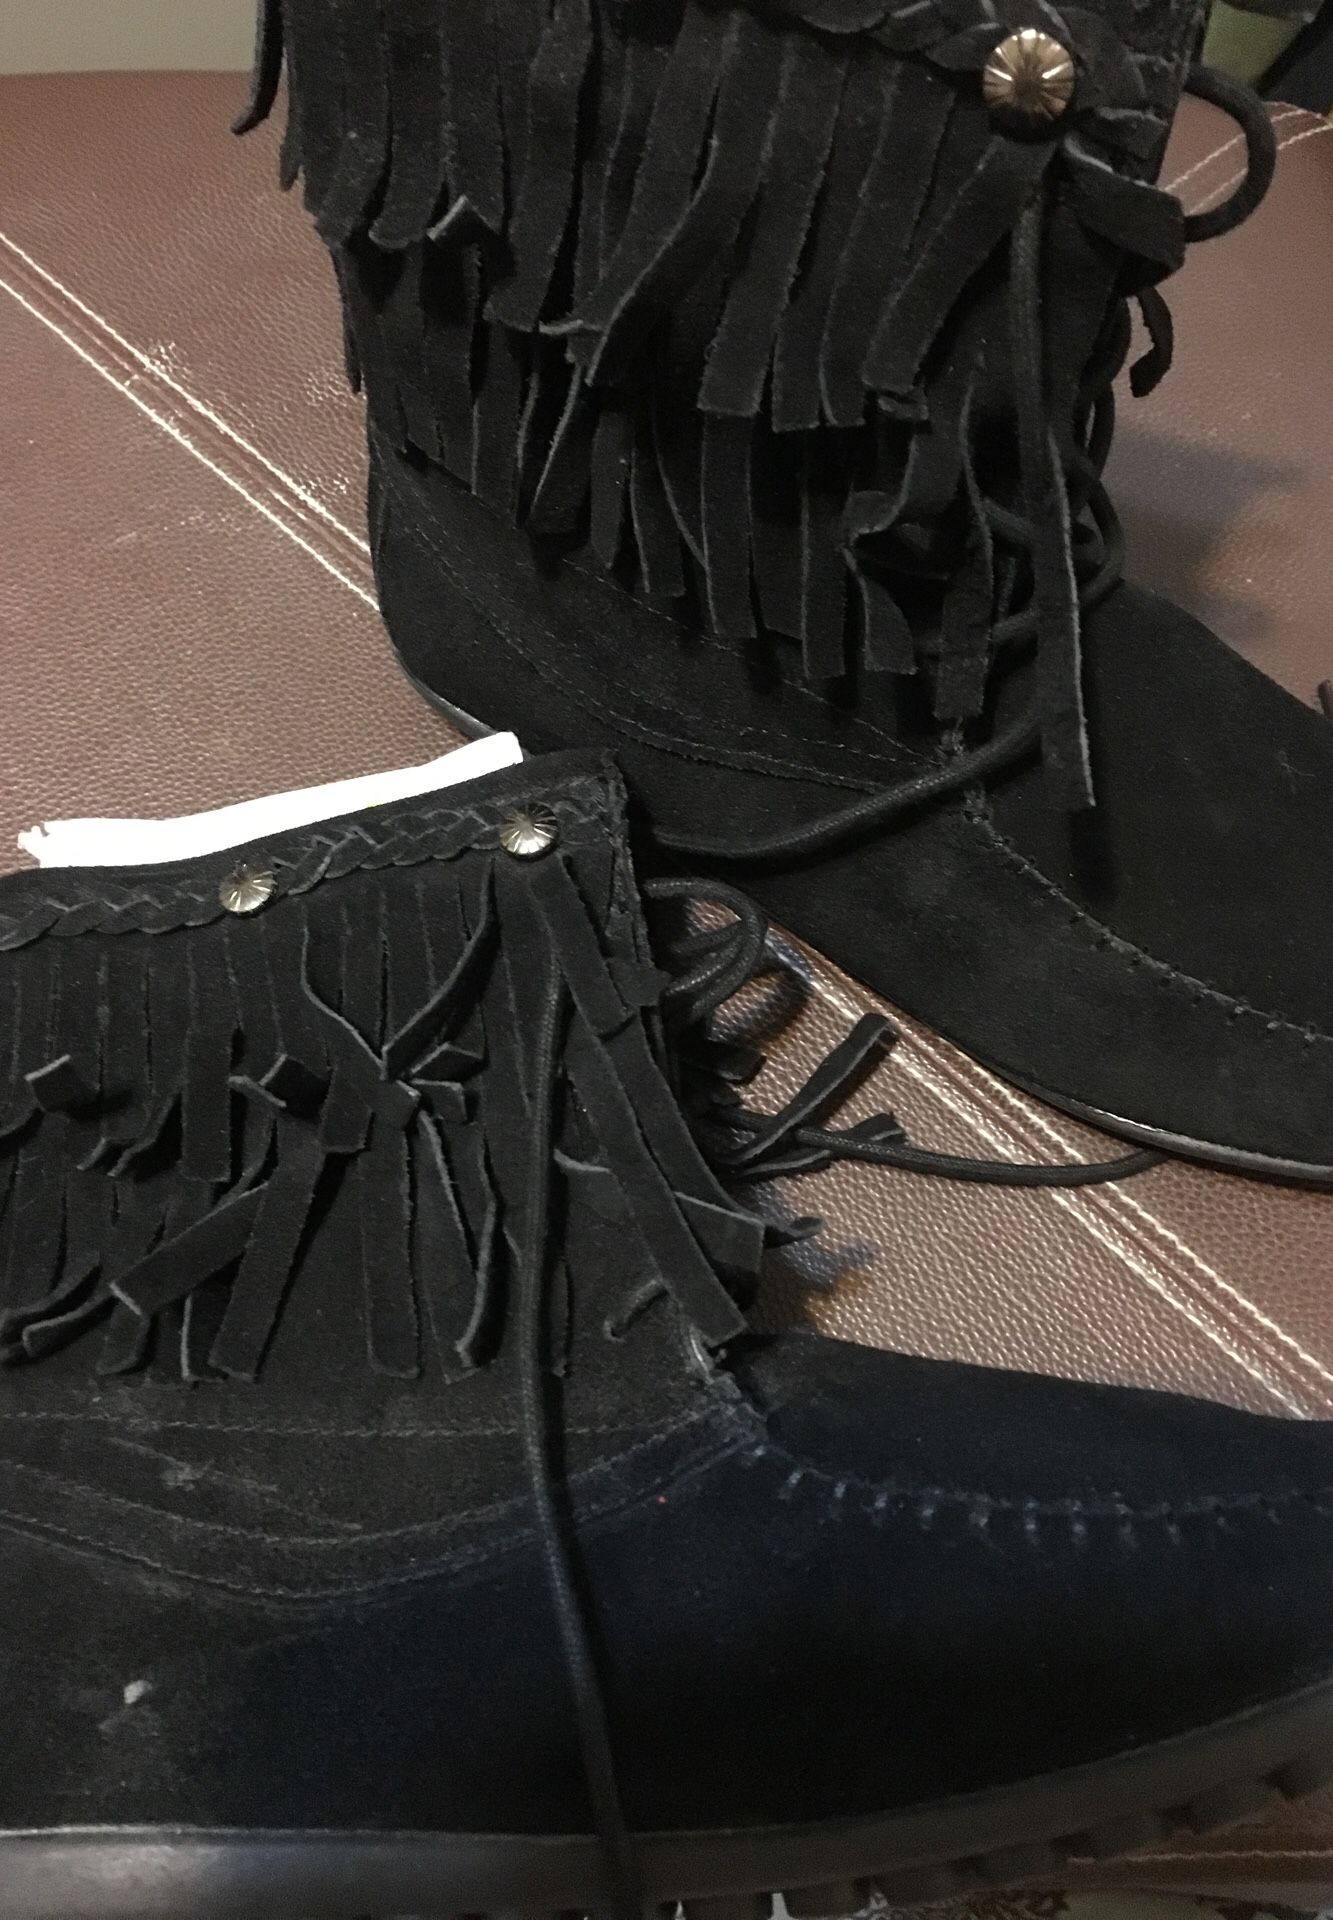 Bucco leather/suede fringed, black moccasin boots